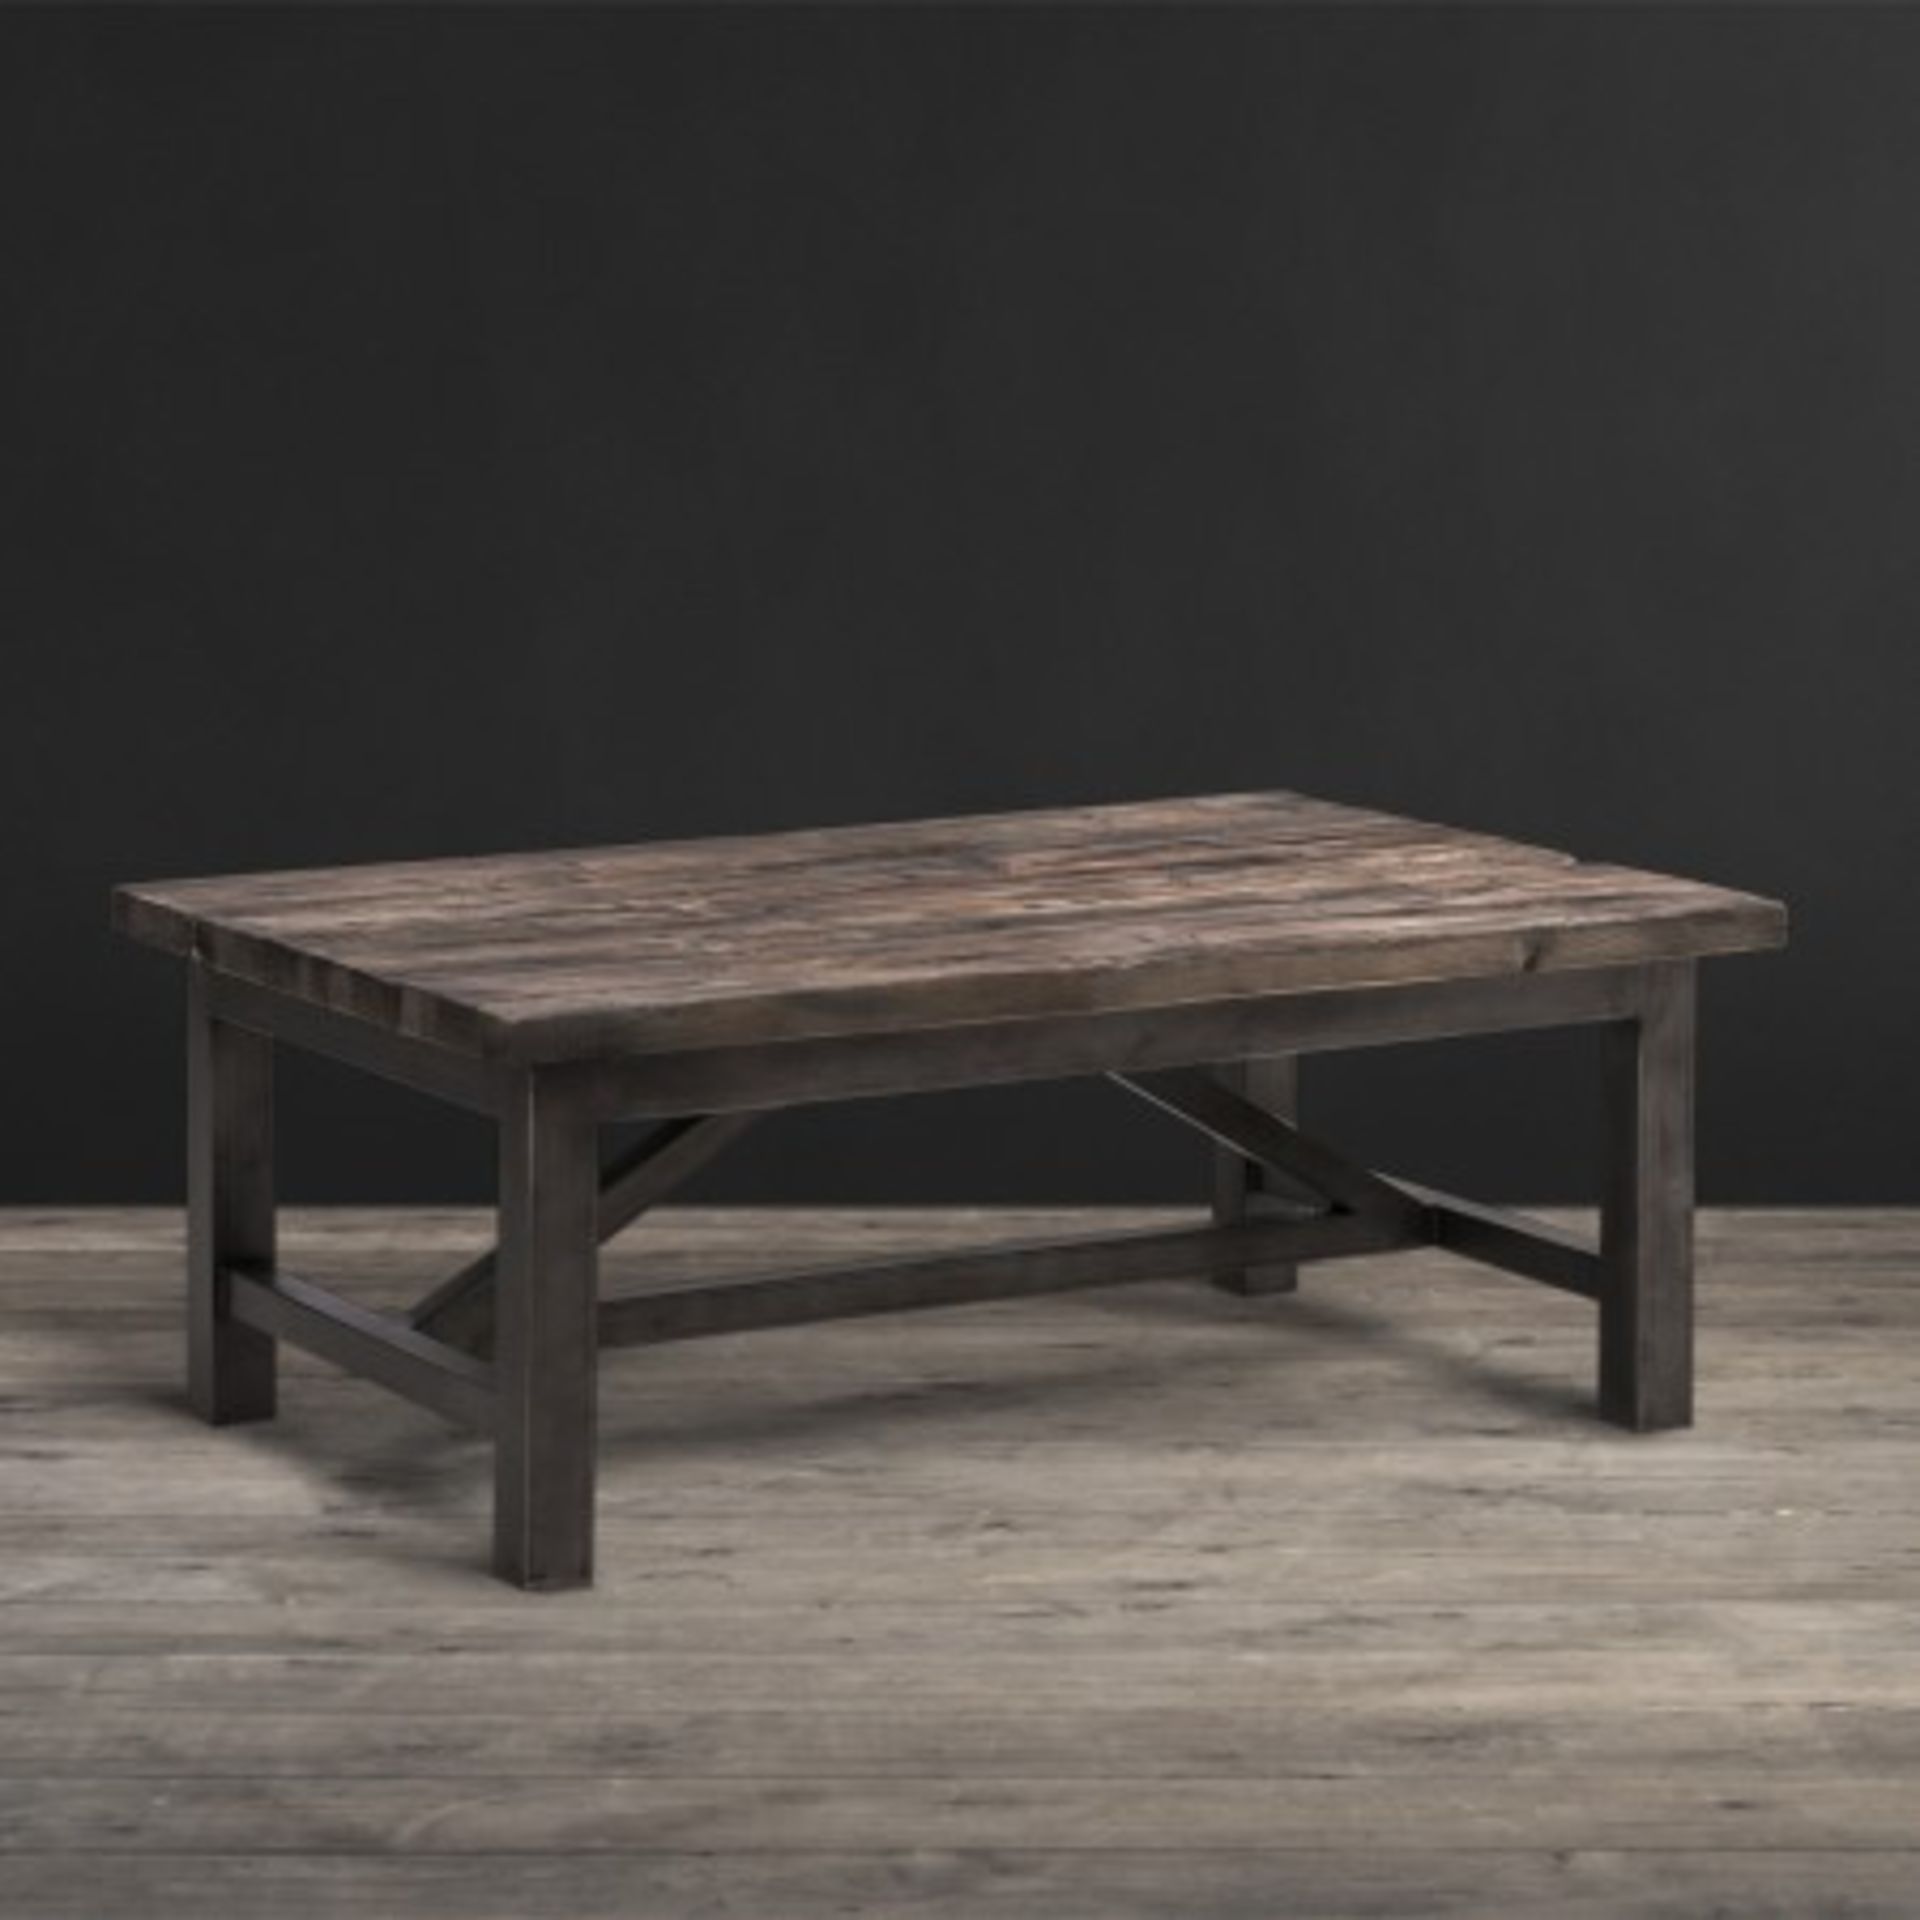 Axel Coffee Table The Axel Range Combines Old World And Industrial With Its Combination of Reclaimed